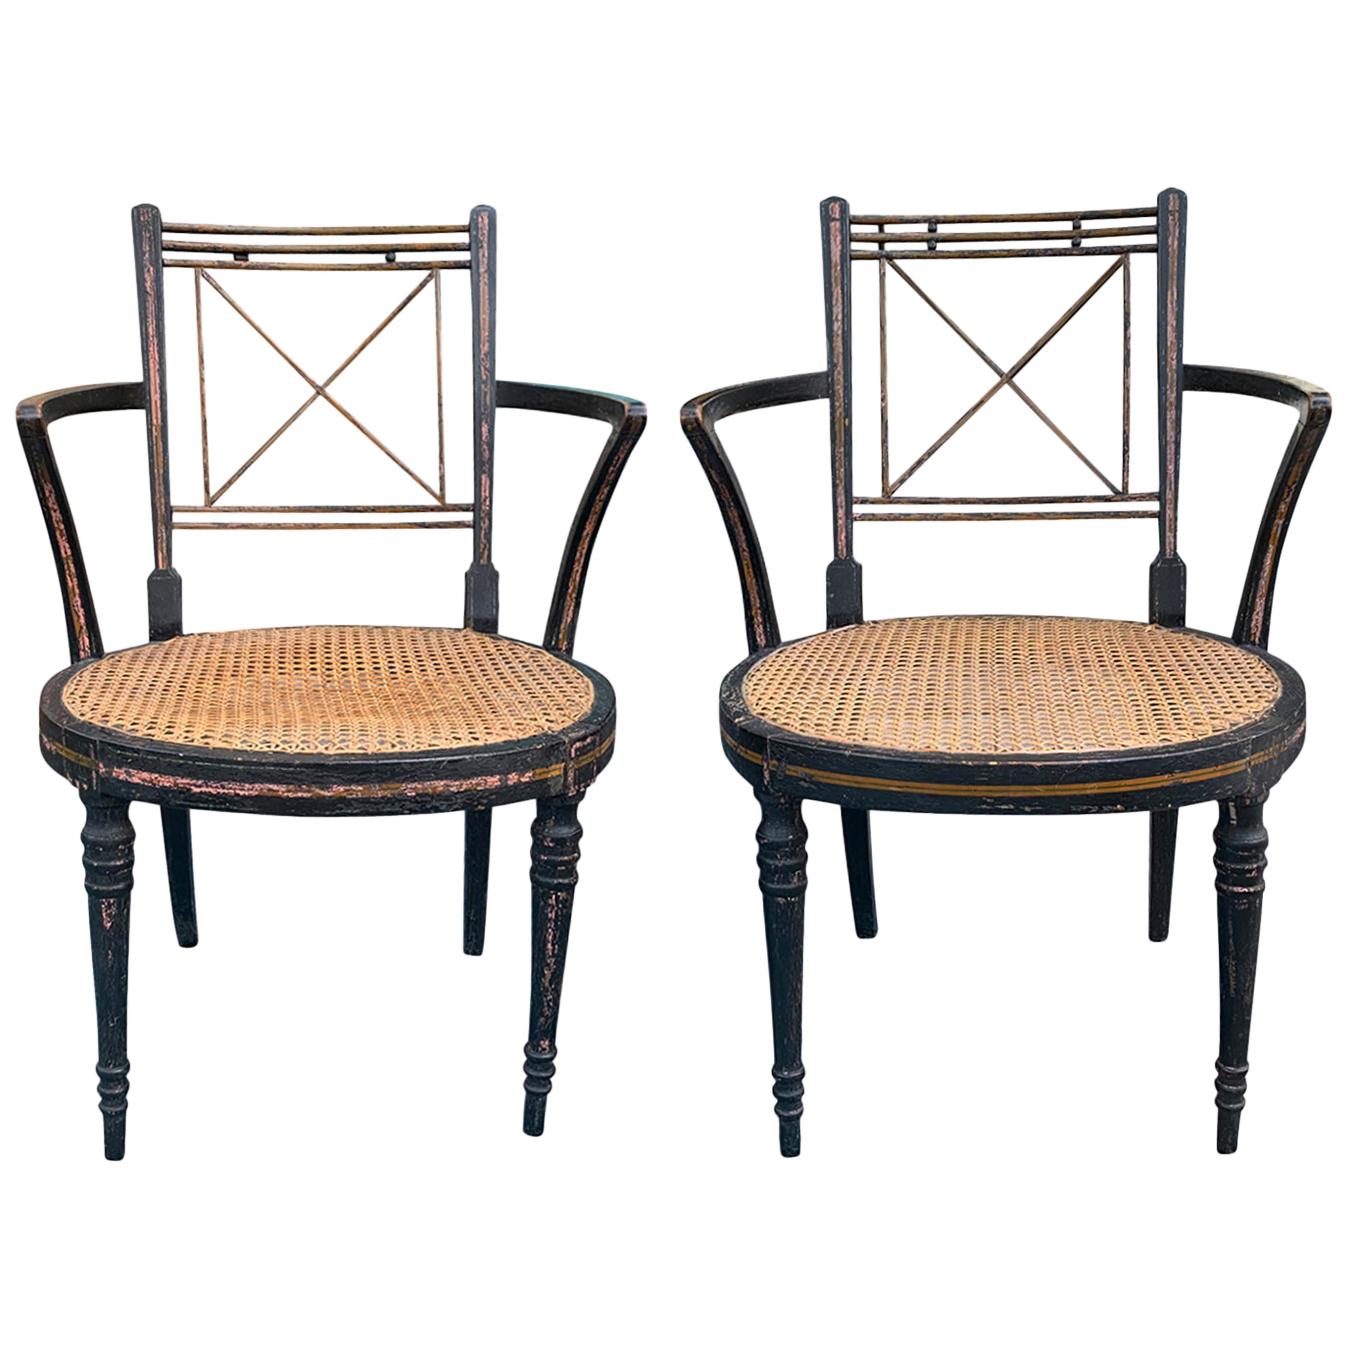 Pair of Ebonized English Regency Armchairs with Cane Seats, circa 1810 For Sale